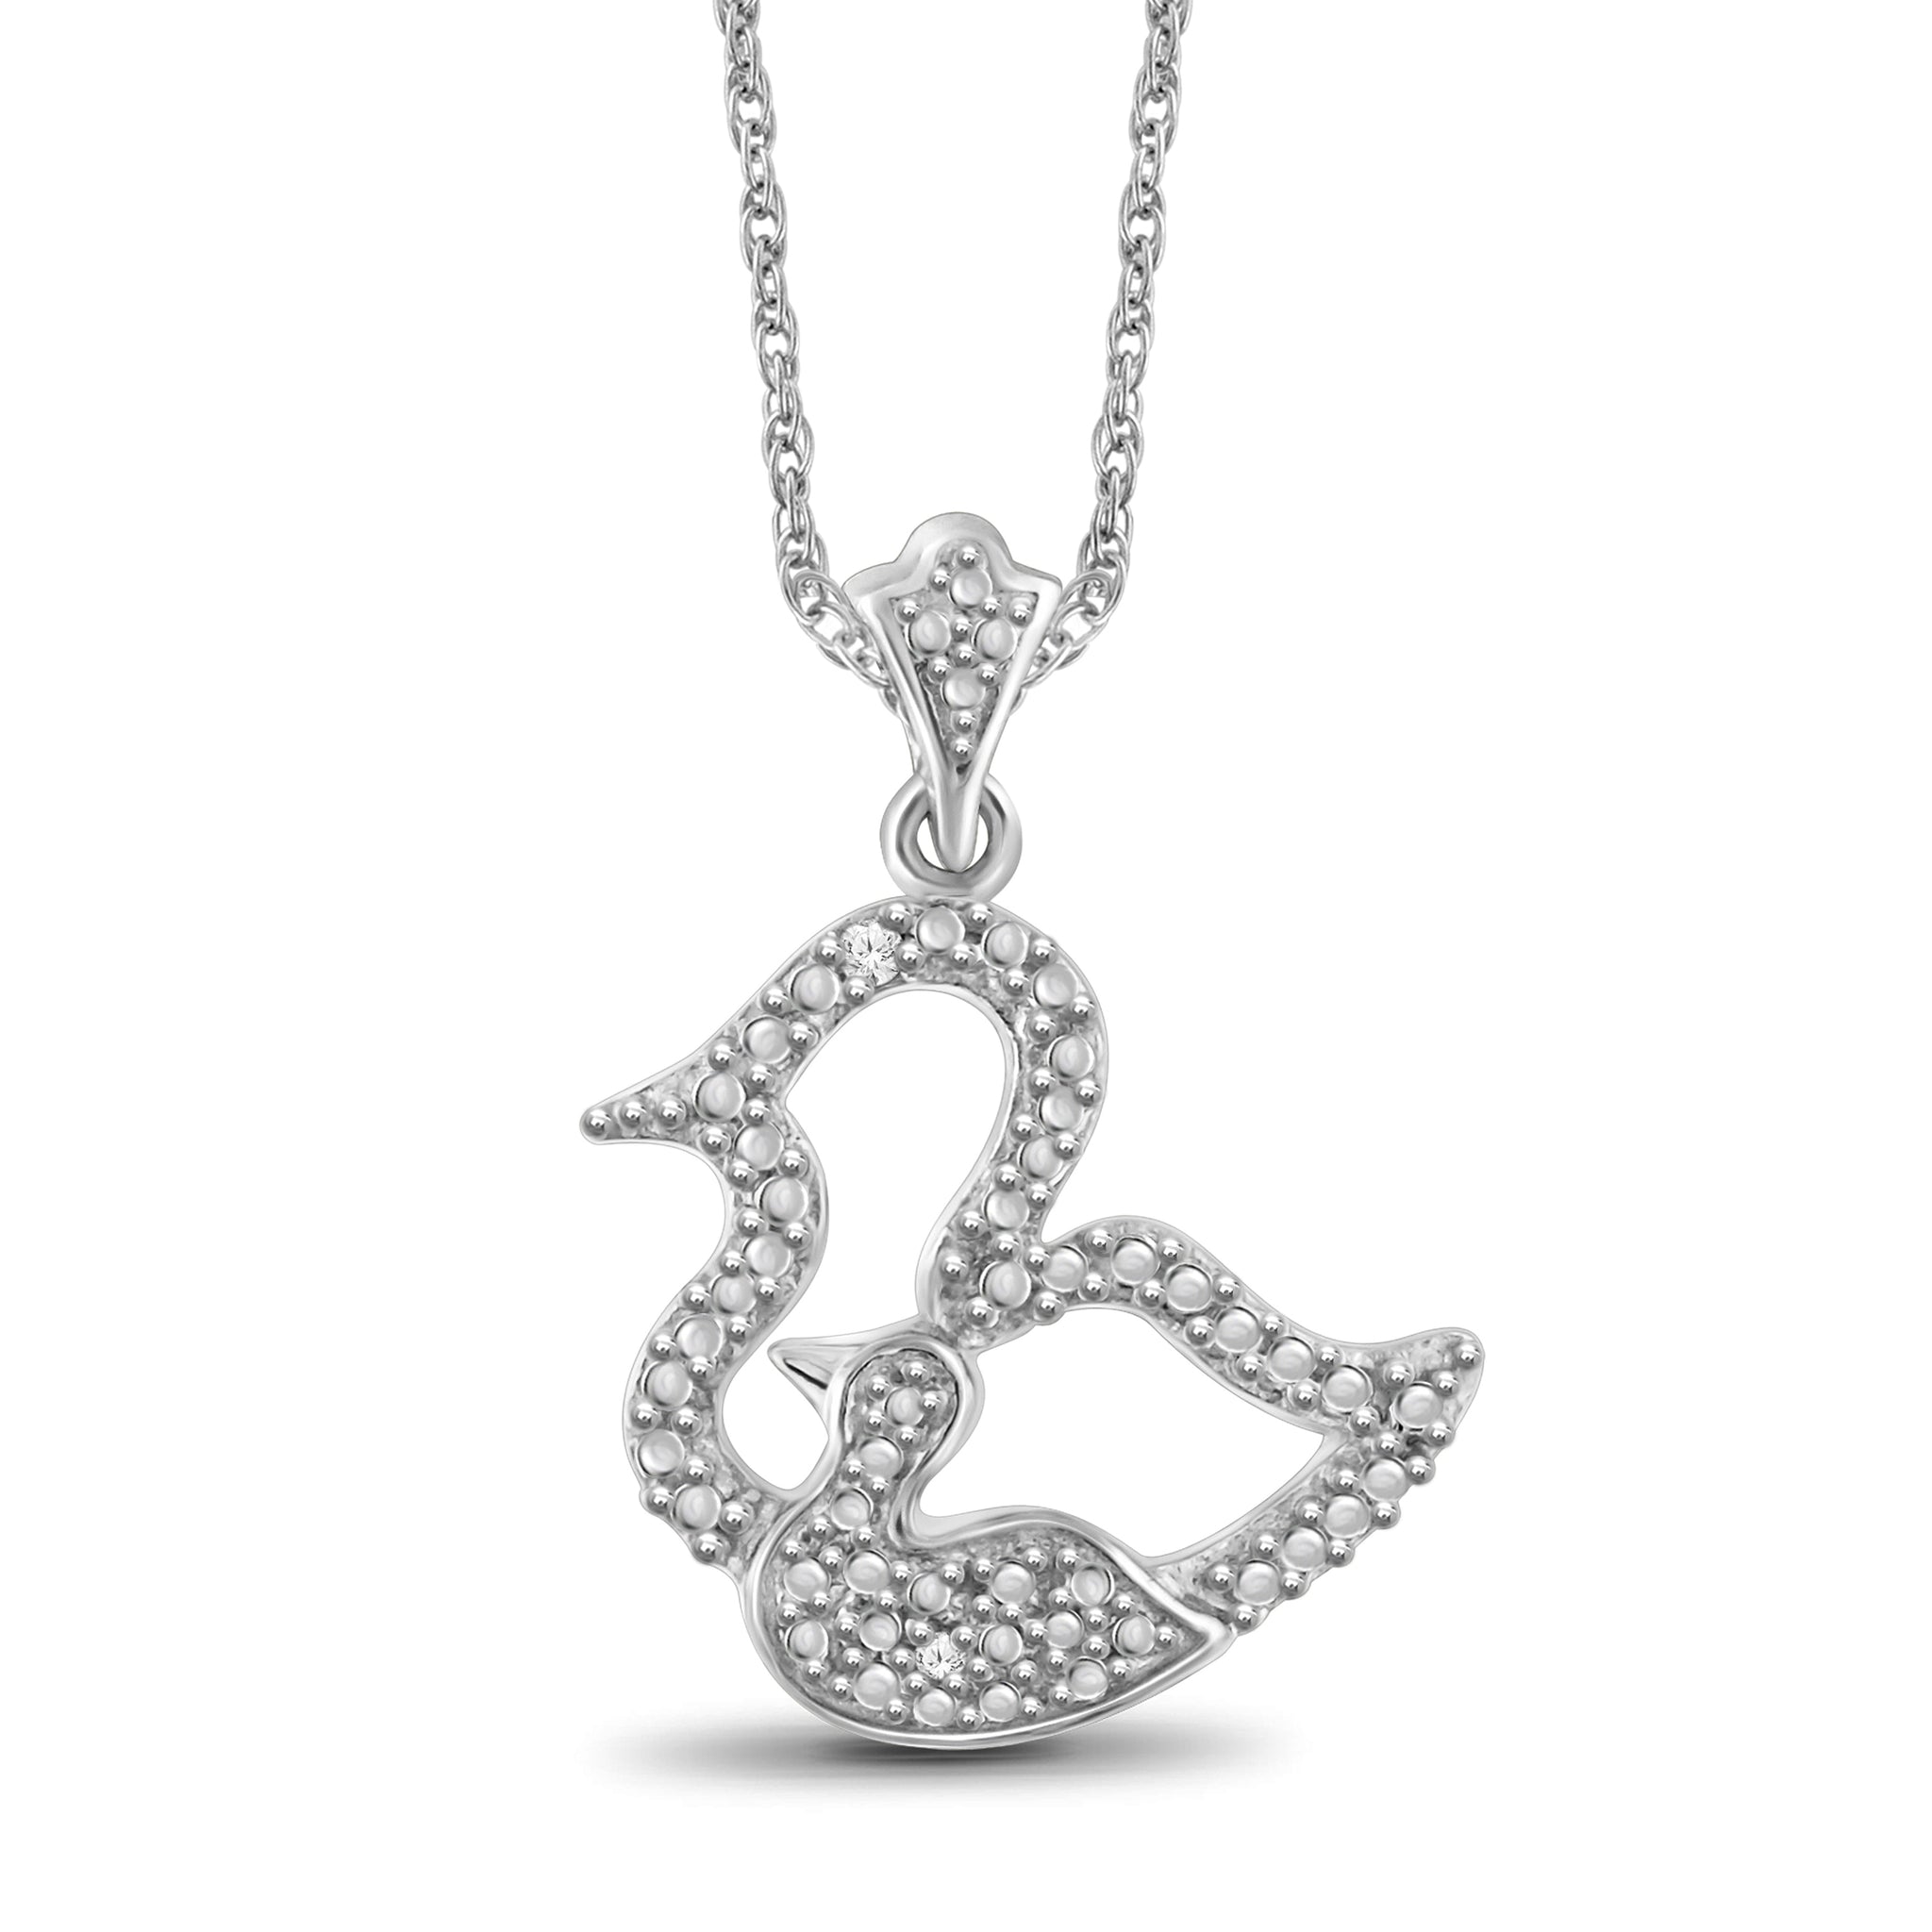 JewelonFire Accent White Diamond Motherly Duck Pendant in Sterling Silver